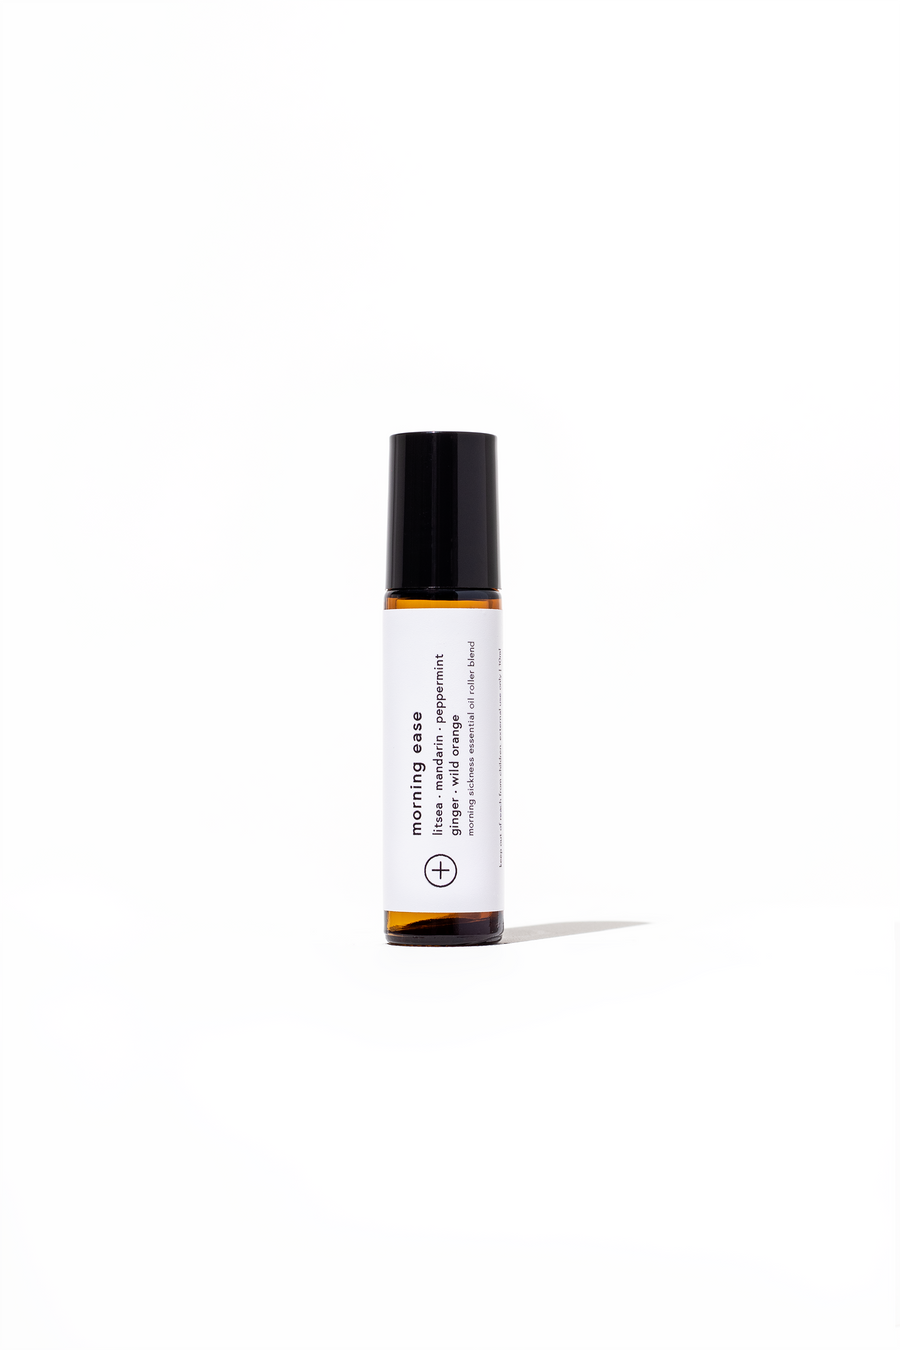 Cleanse & Co. Mumma & Kids Blend. Morning Ease. Morning Sickness Essential Oil Roller.